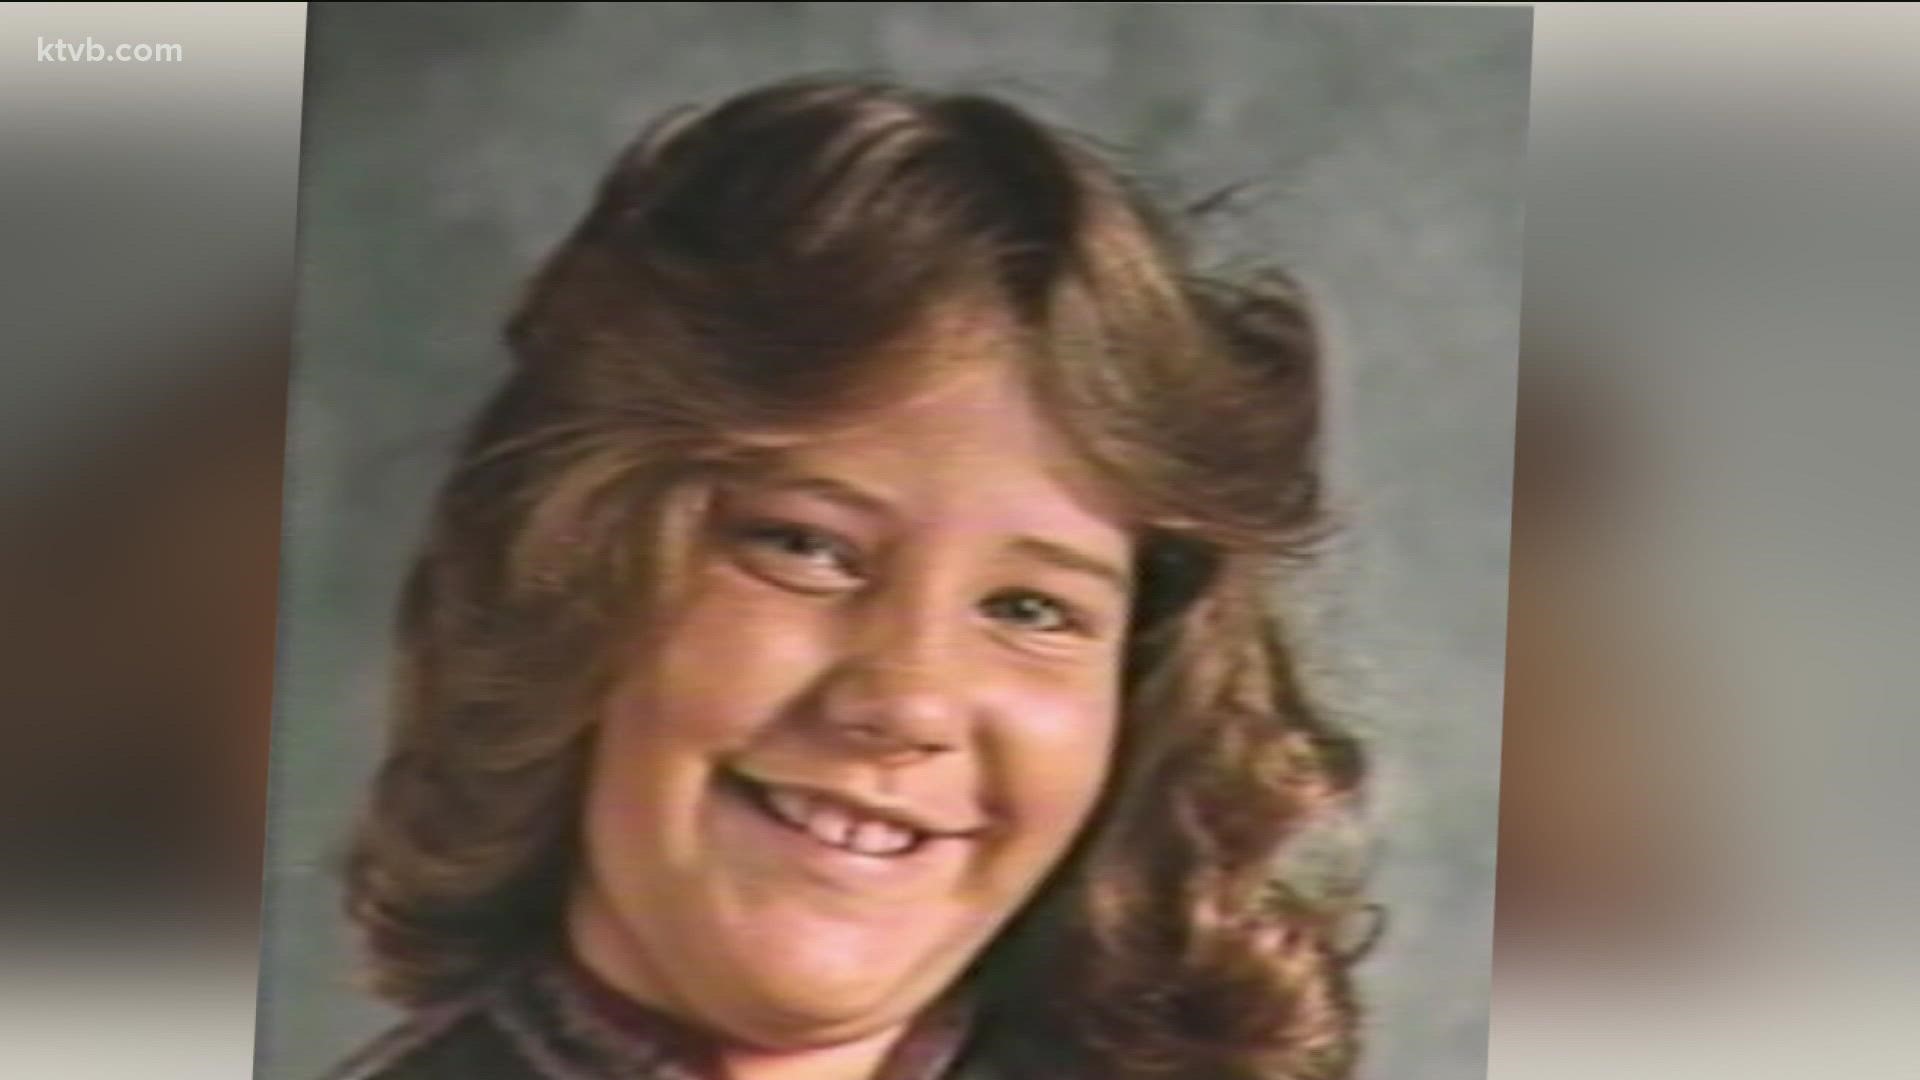 Daralyn Johnson disappeared four decades ago as she walked to her elementary school.